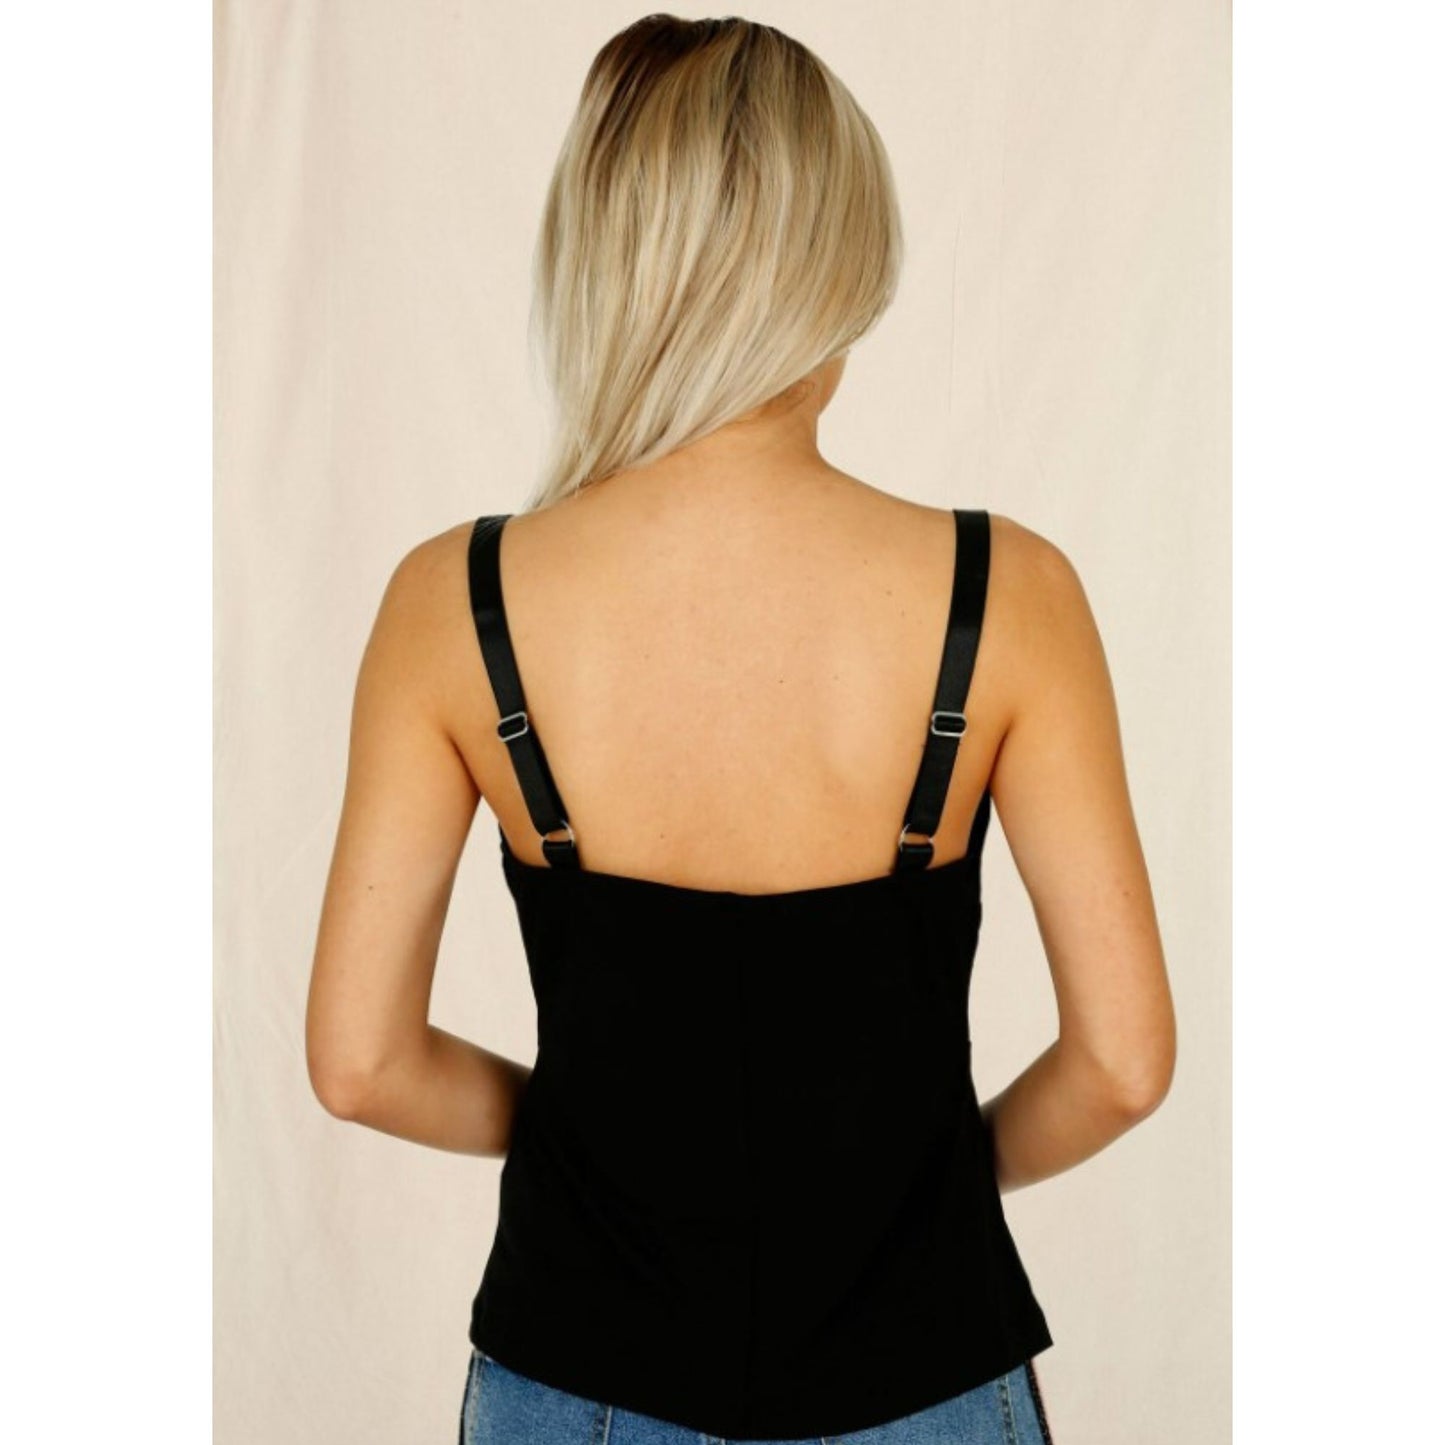 CAMI THING Camisole